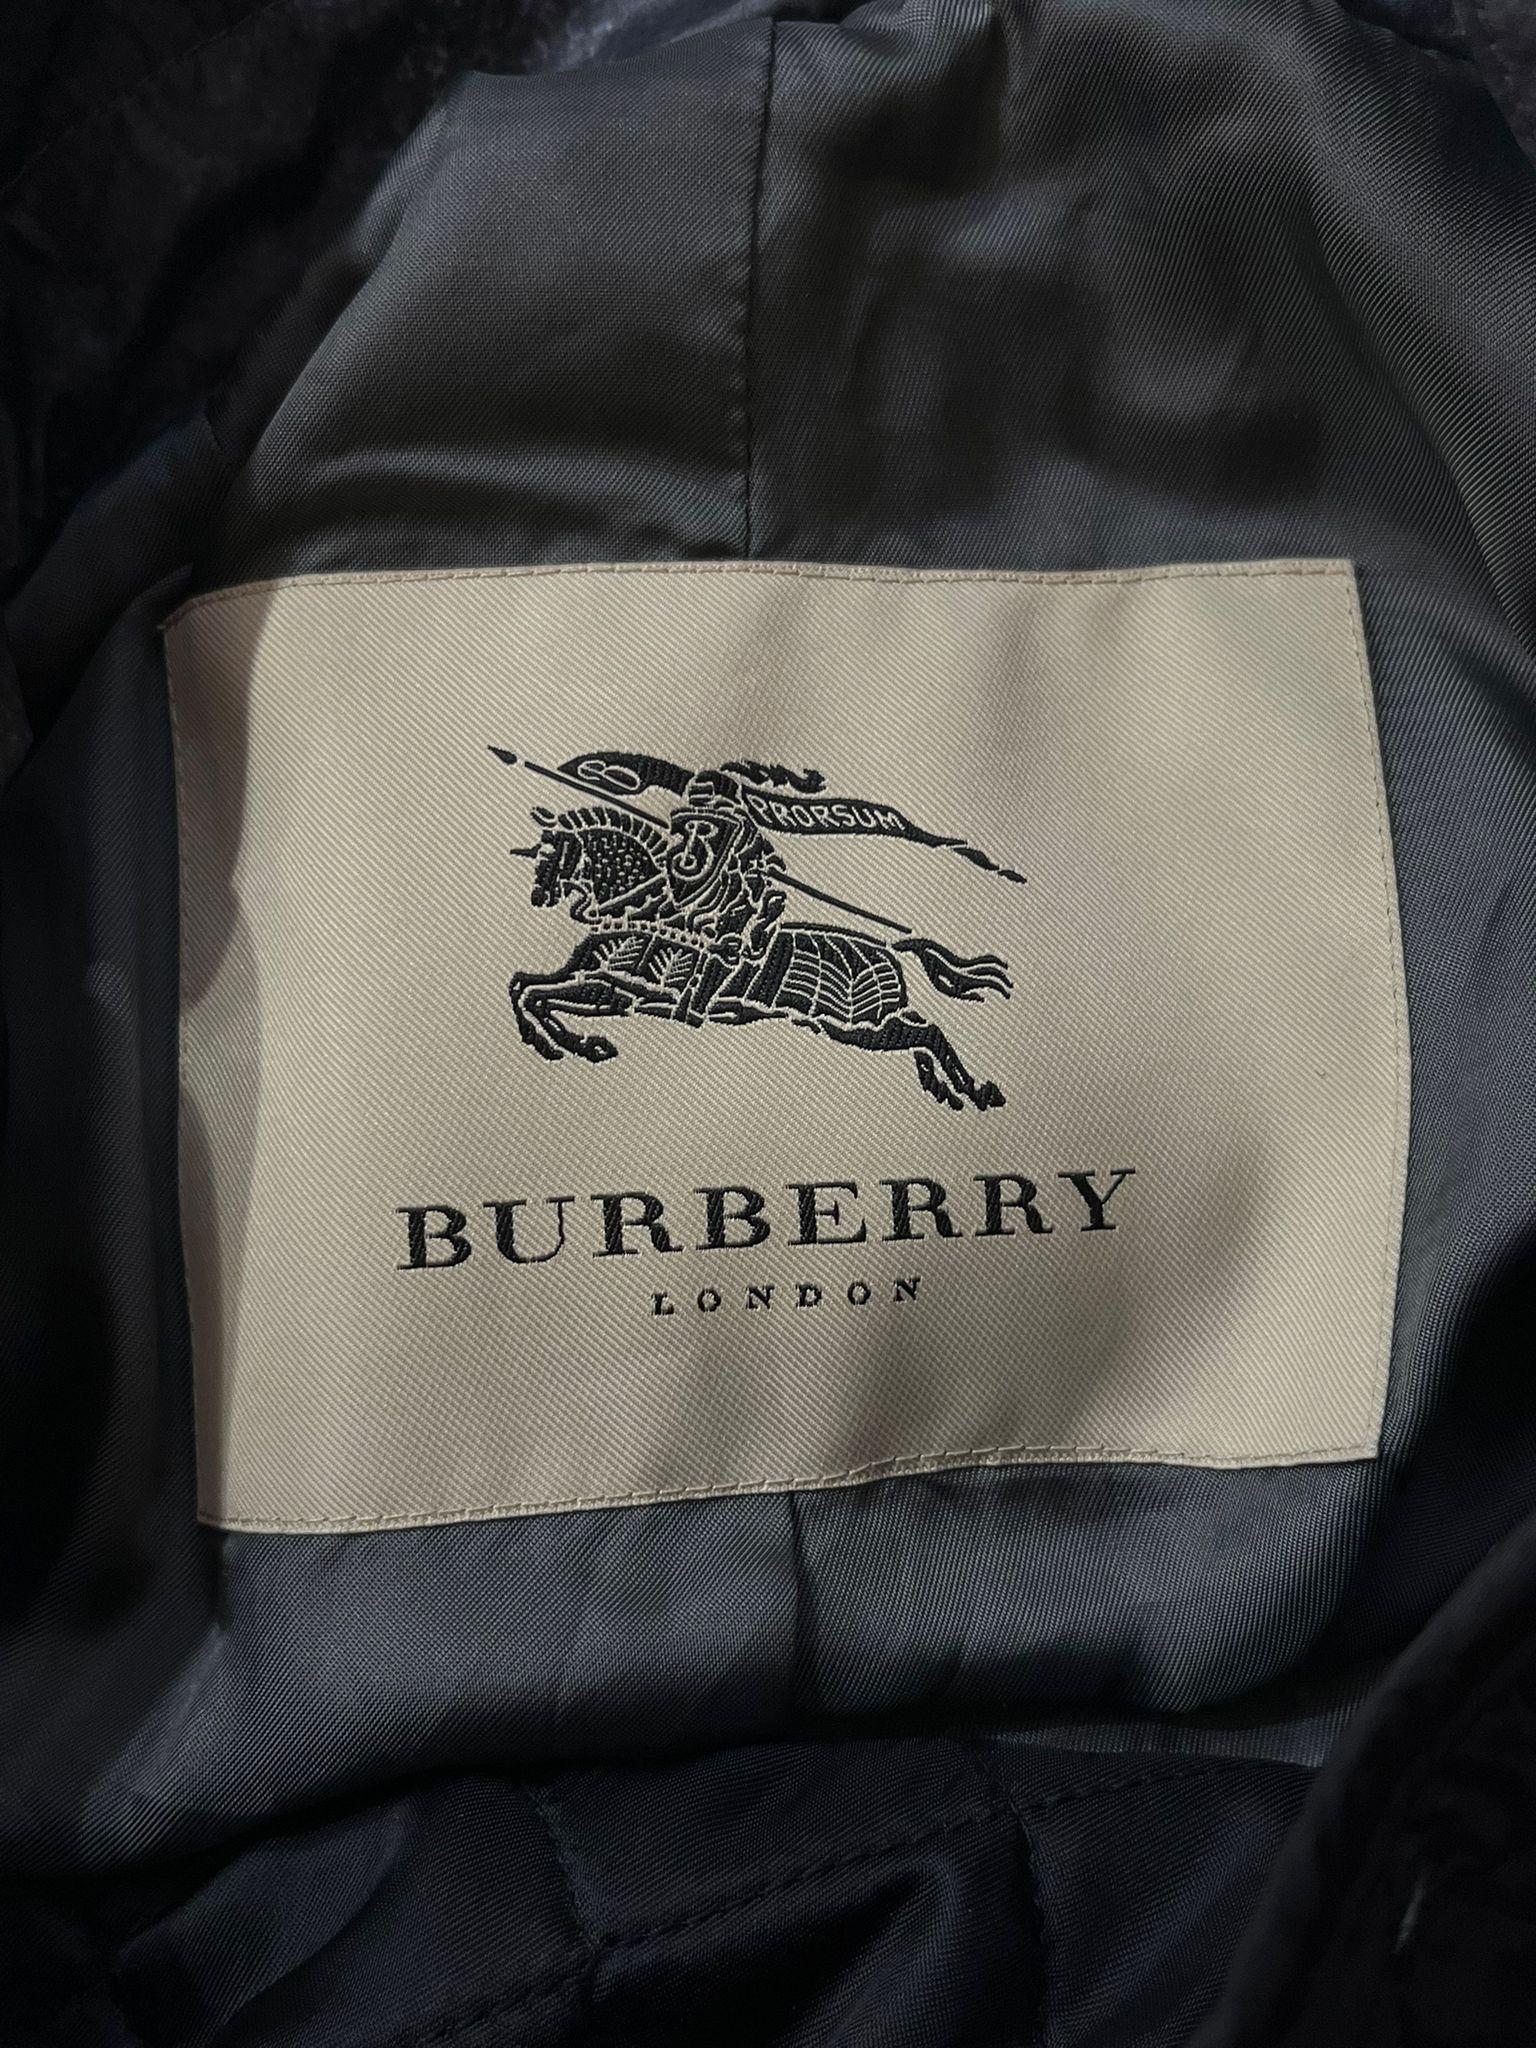 Burberry London Checked Trench Coat For Sale 4